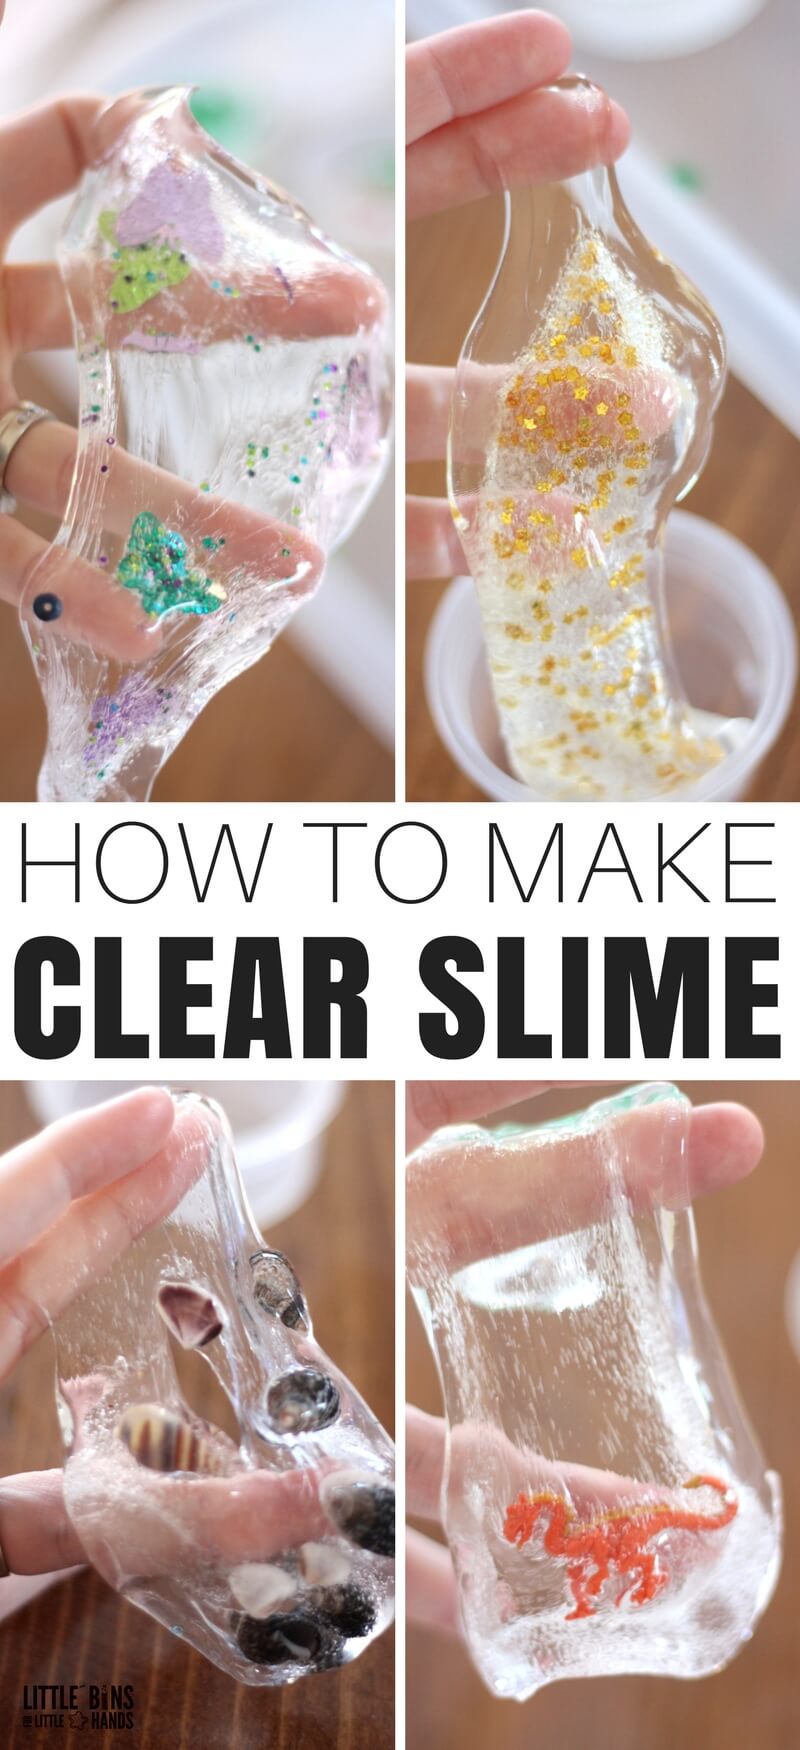 How to make clear slime is one of the most searched terms on our website, so I wanted to make sure I had a great resource for making clear homemade slime to share with you. There are two slime recipes for making clear slime you will enjoy. Learning how to make slime with kids is an awesome science project and tactile sensory play idea.